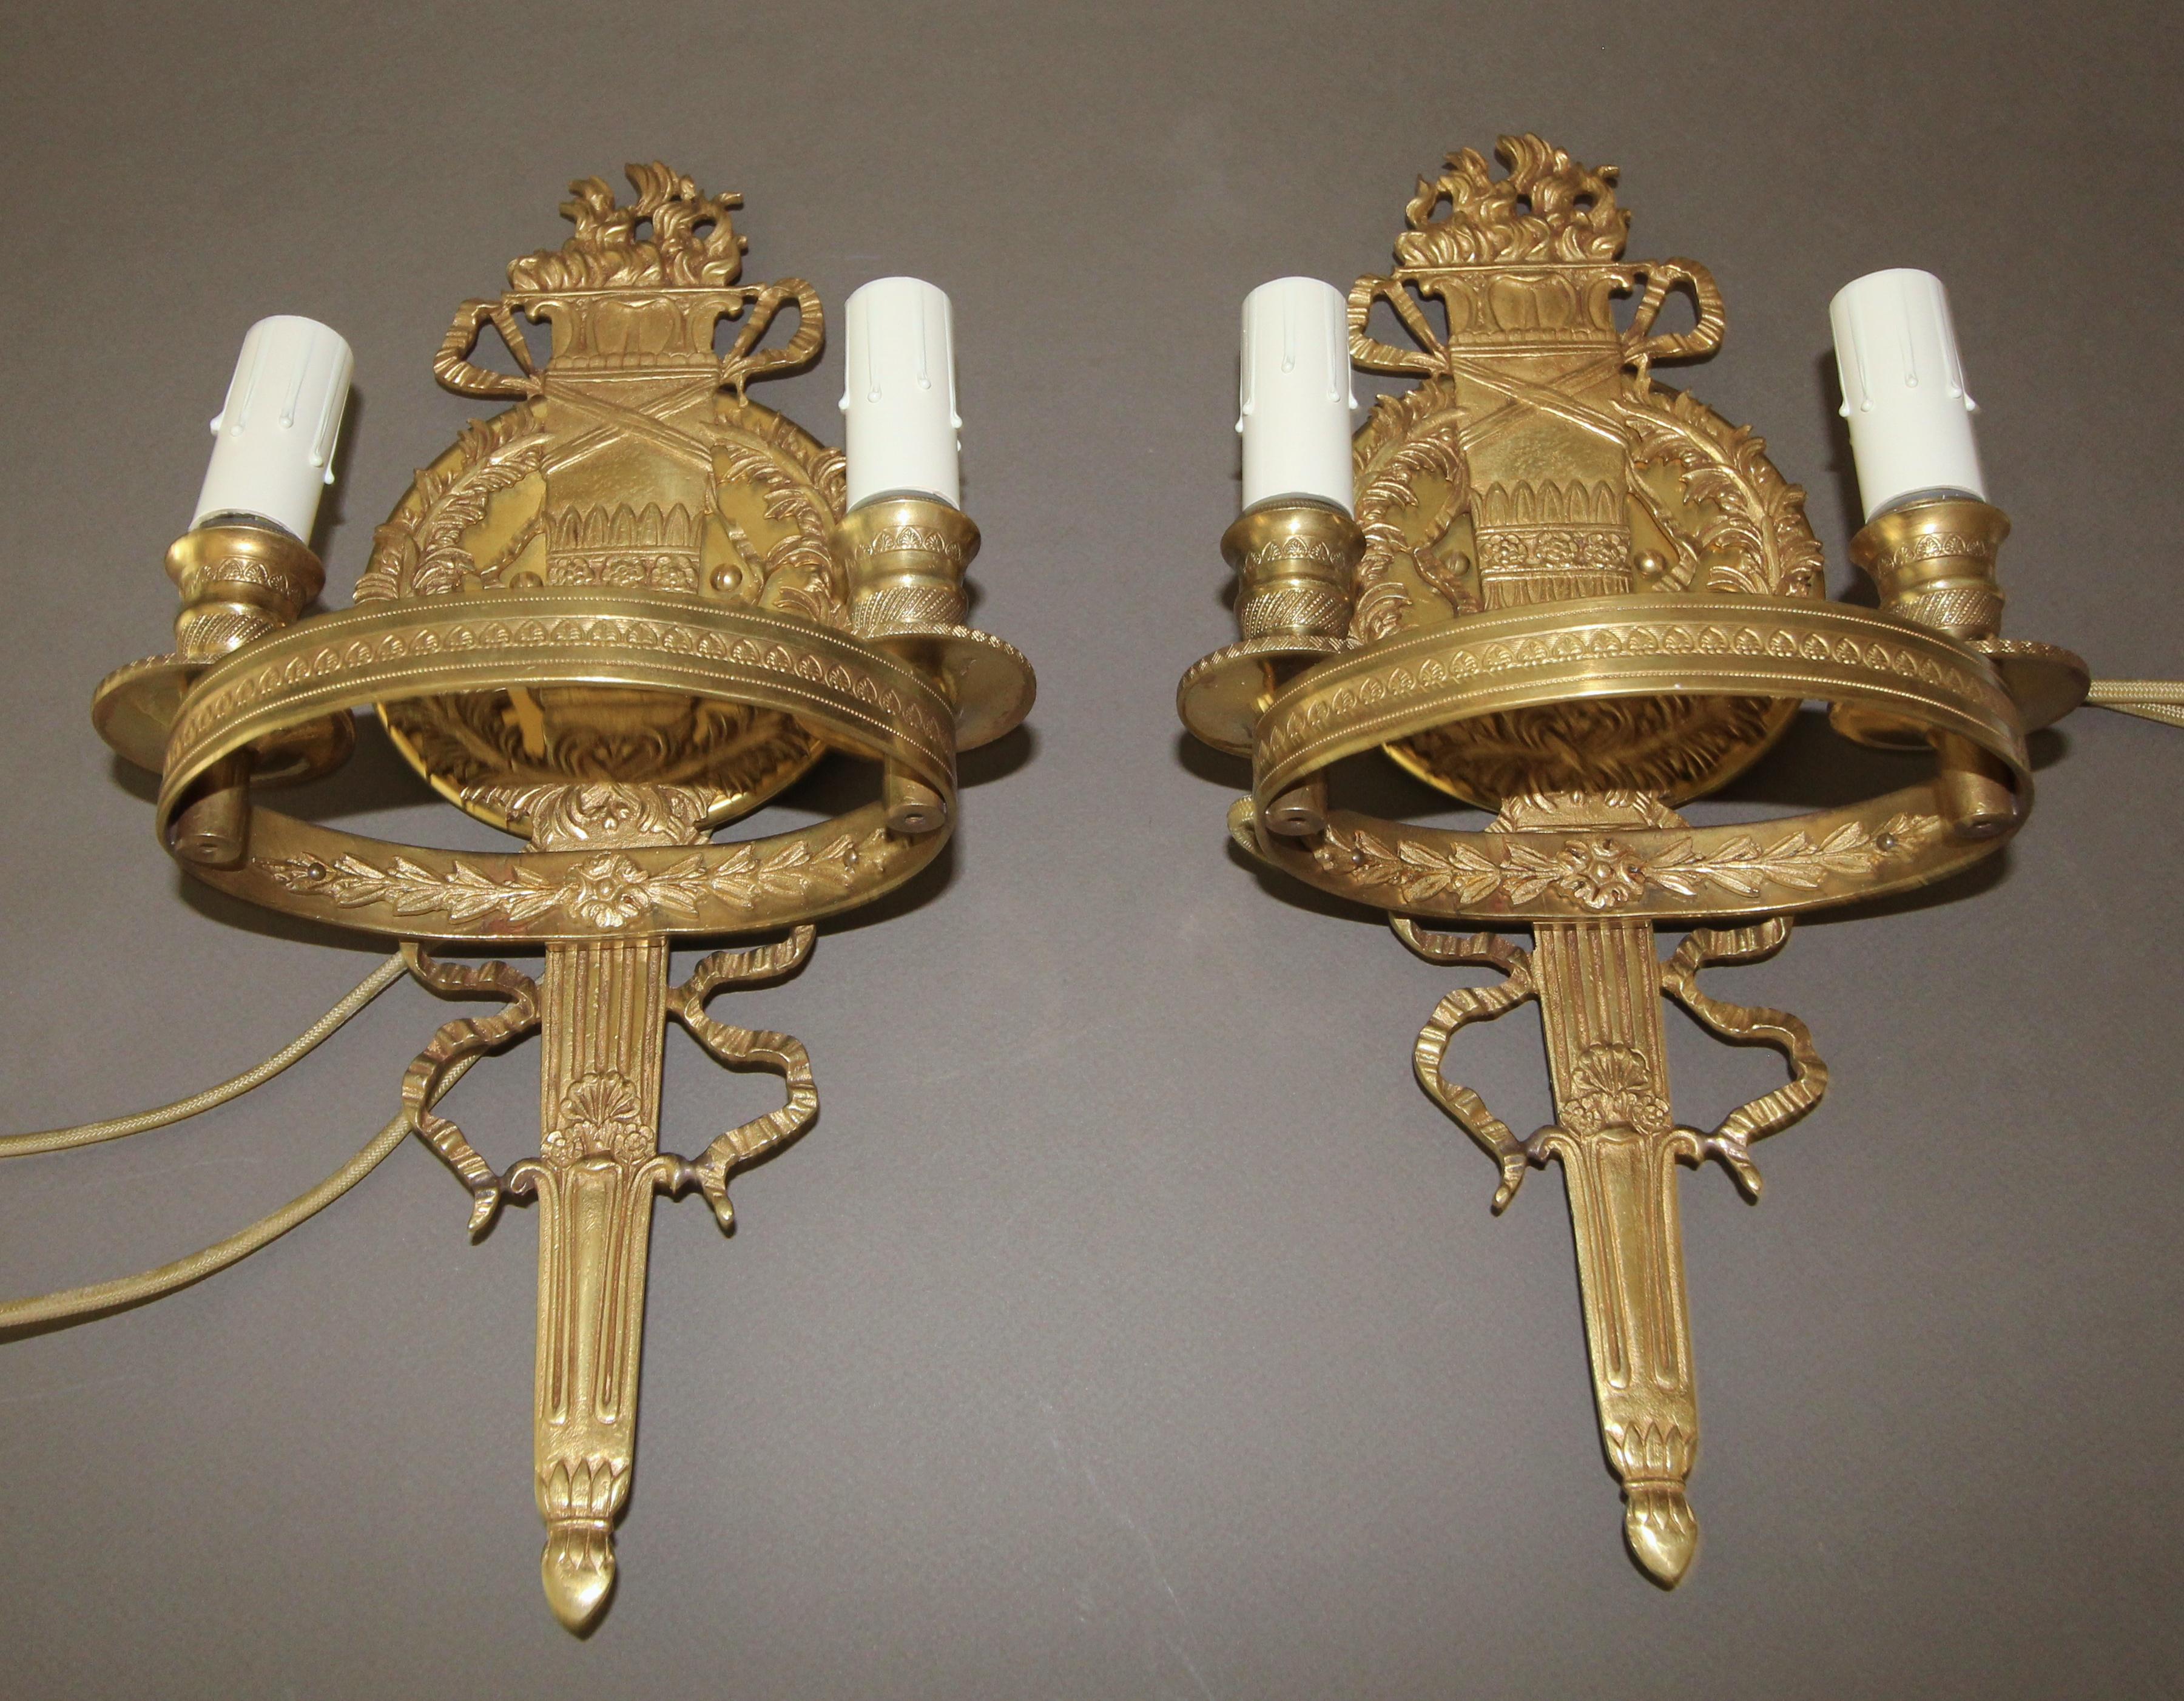 Pair of nicely detailed French Empire style two-arm wall sconces with central flame and torch motif. Newly wired for US with back plates added for US installation.